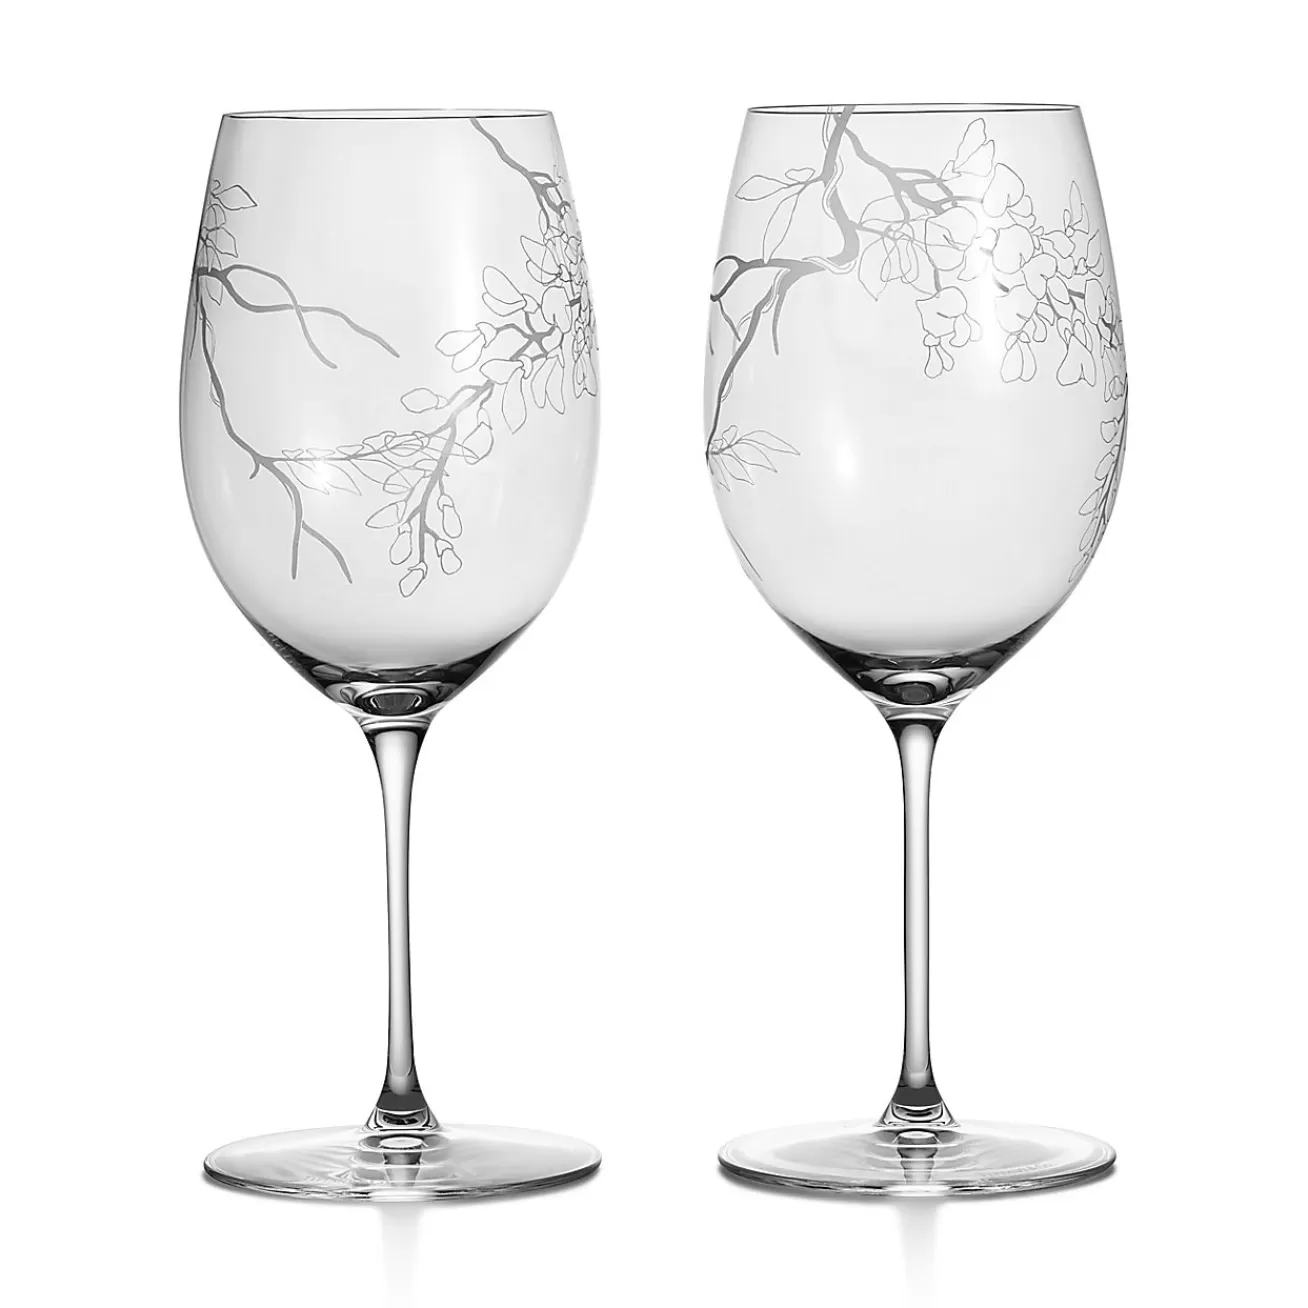 Tiffany & Co. Tiffany Wisteria Red Wine Glasses in Etched Glass, Set of Two | ^ The Home | Housewarming Gifts